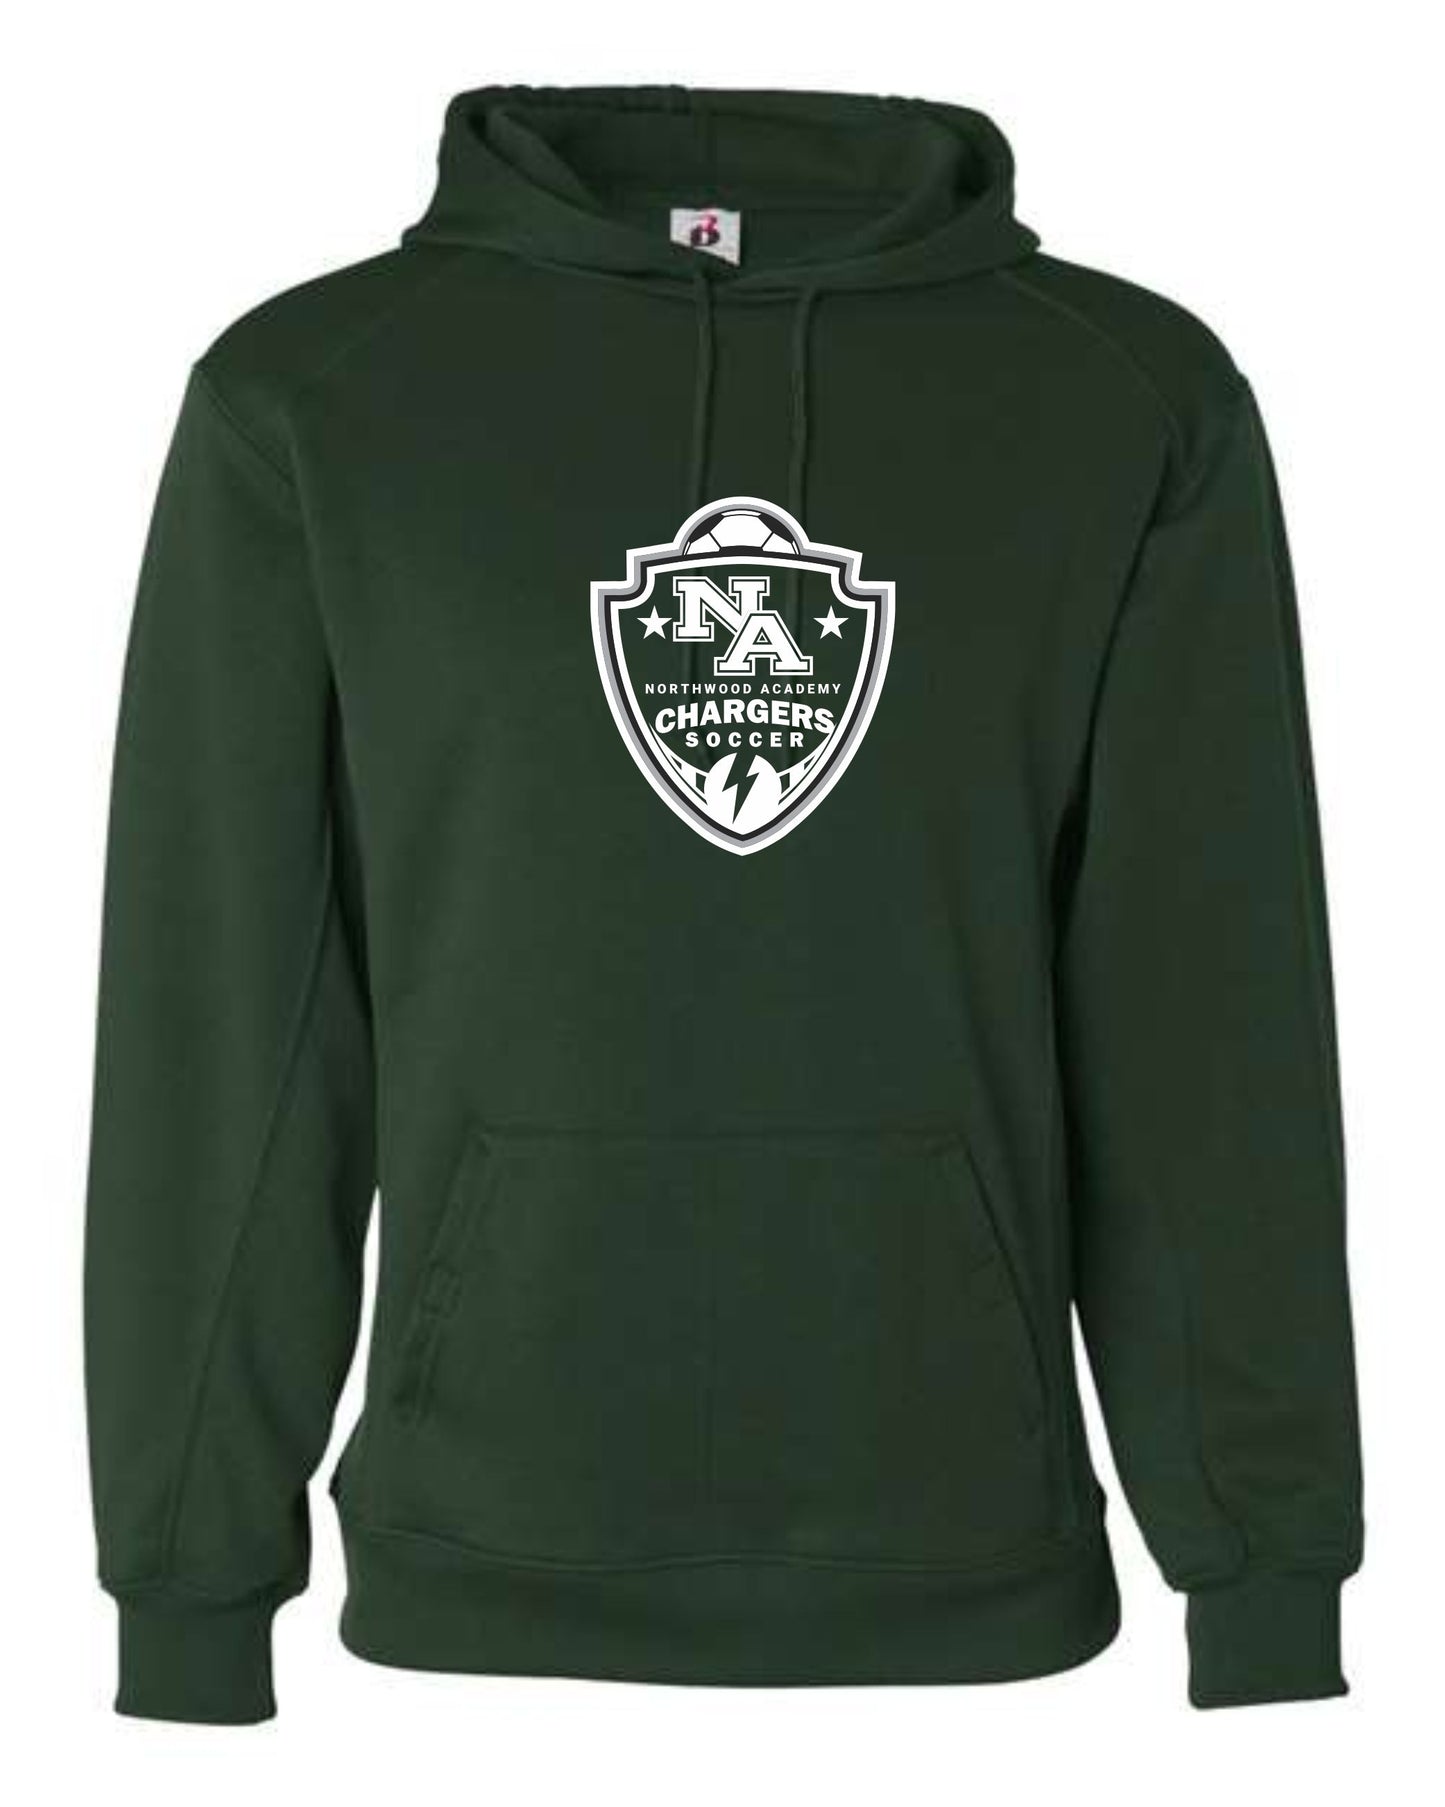 Soccer Performance Hoodie Approved School Attire (3 colors)